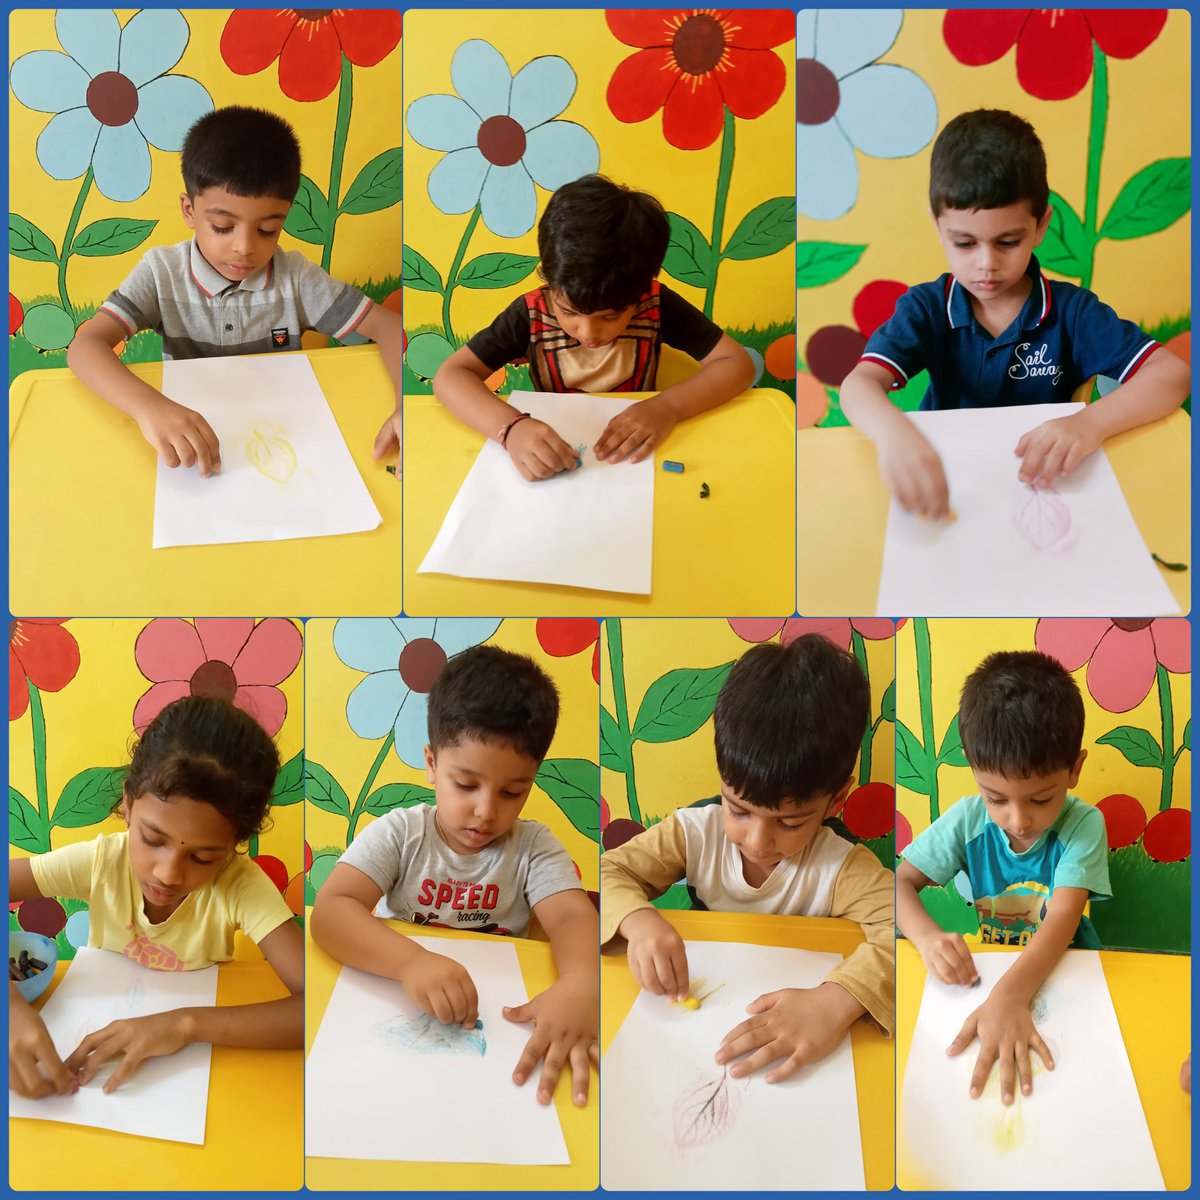 A few snaps from the classroom fun & learn activities... 
#Preschoolers
#toddlers #preschool #daycare #childcare #childdevelopment #playschool